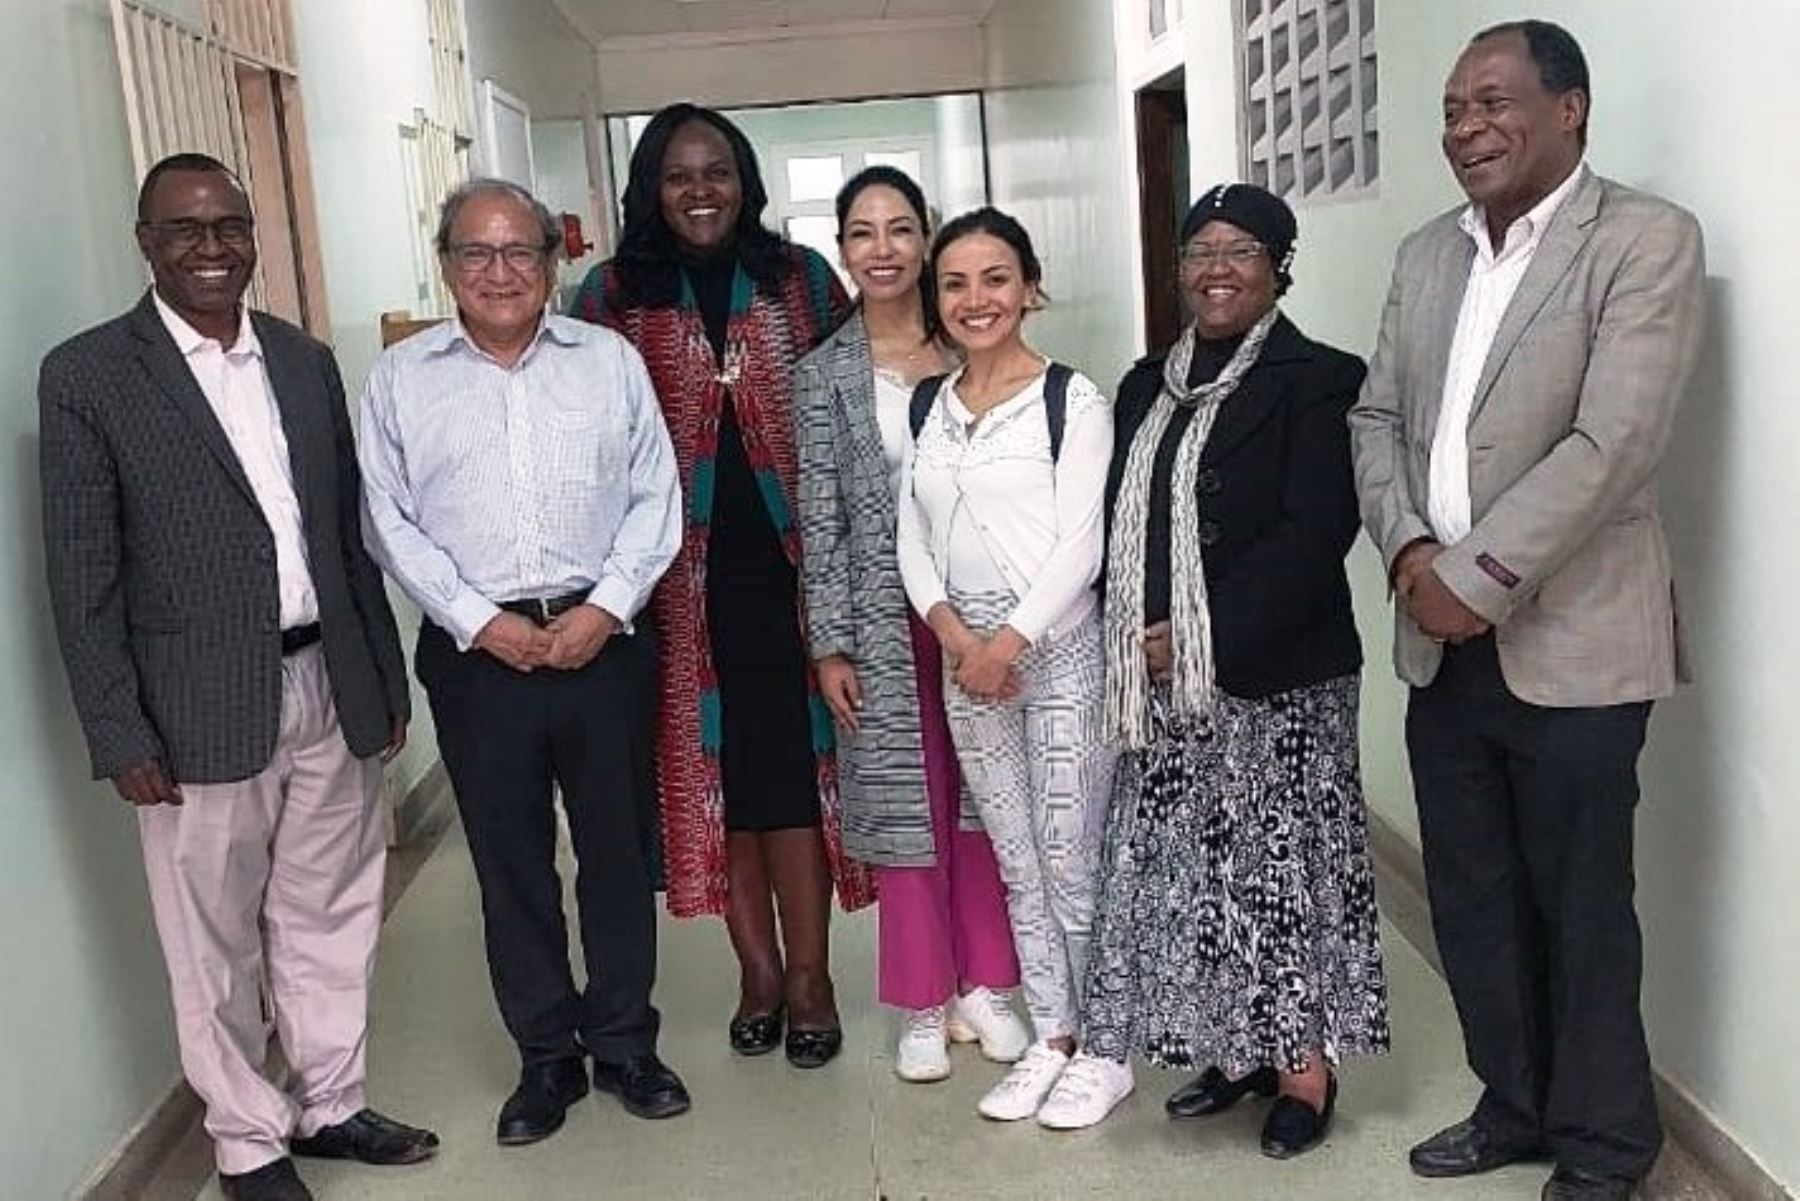 INEN trains doctors on liver cancer surgery in Kenya